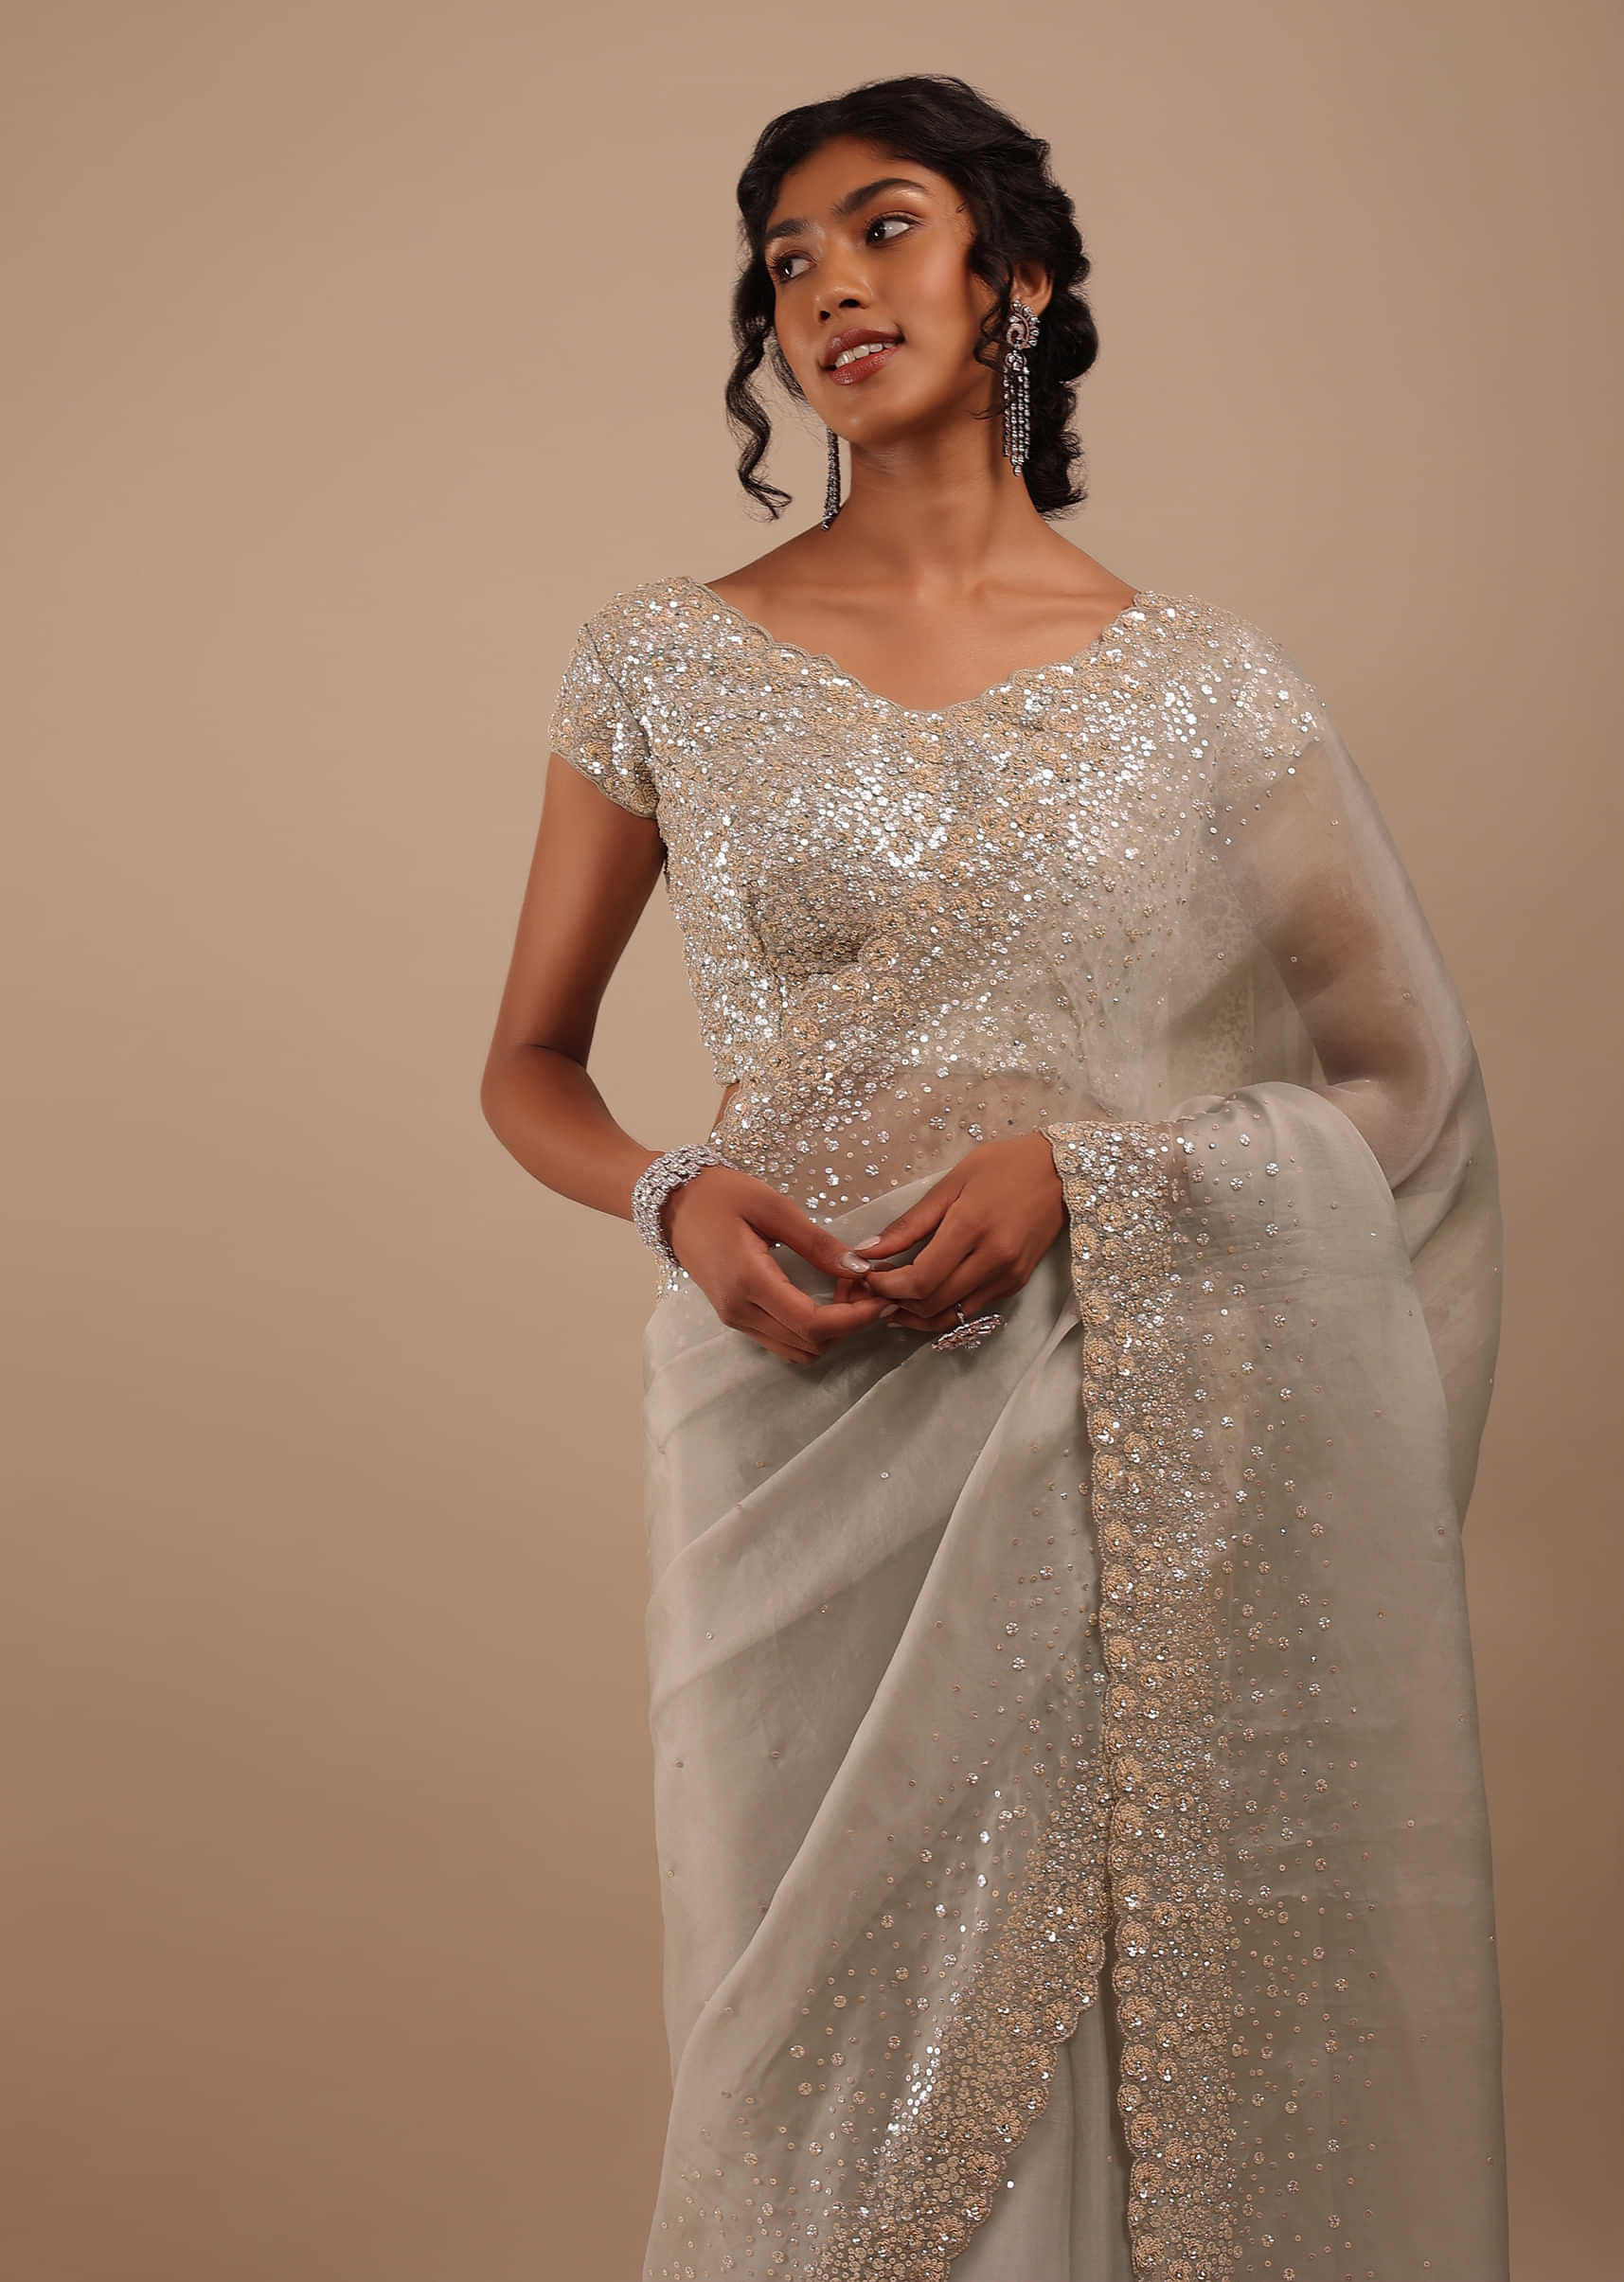 Moonstruck Grey Organza Saree In Grey And Cream Sequins 3D Floral Motifs Embroidery With The Cutwork Detailing On Border